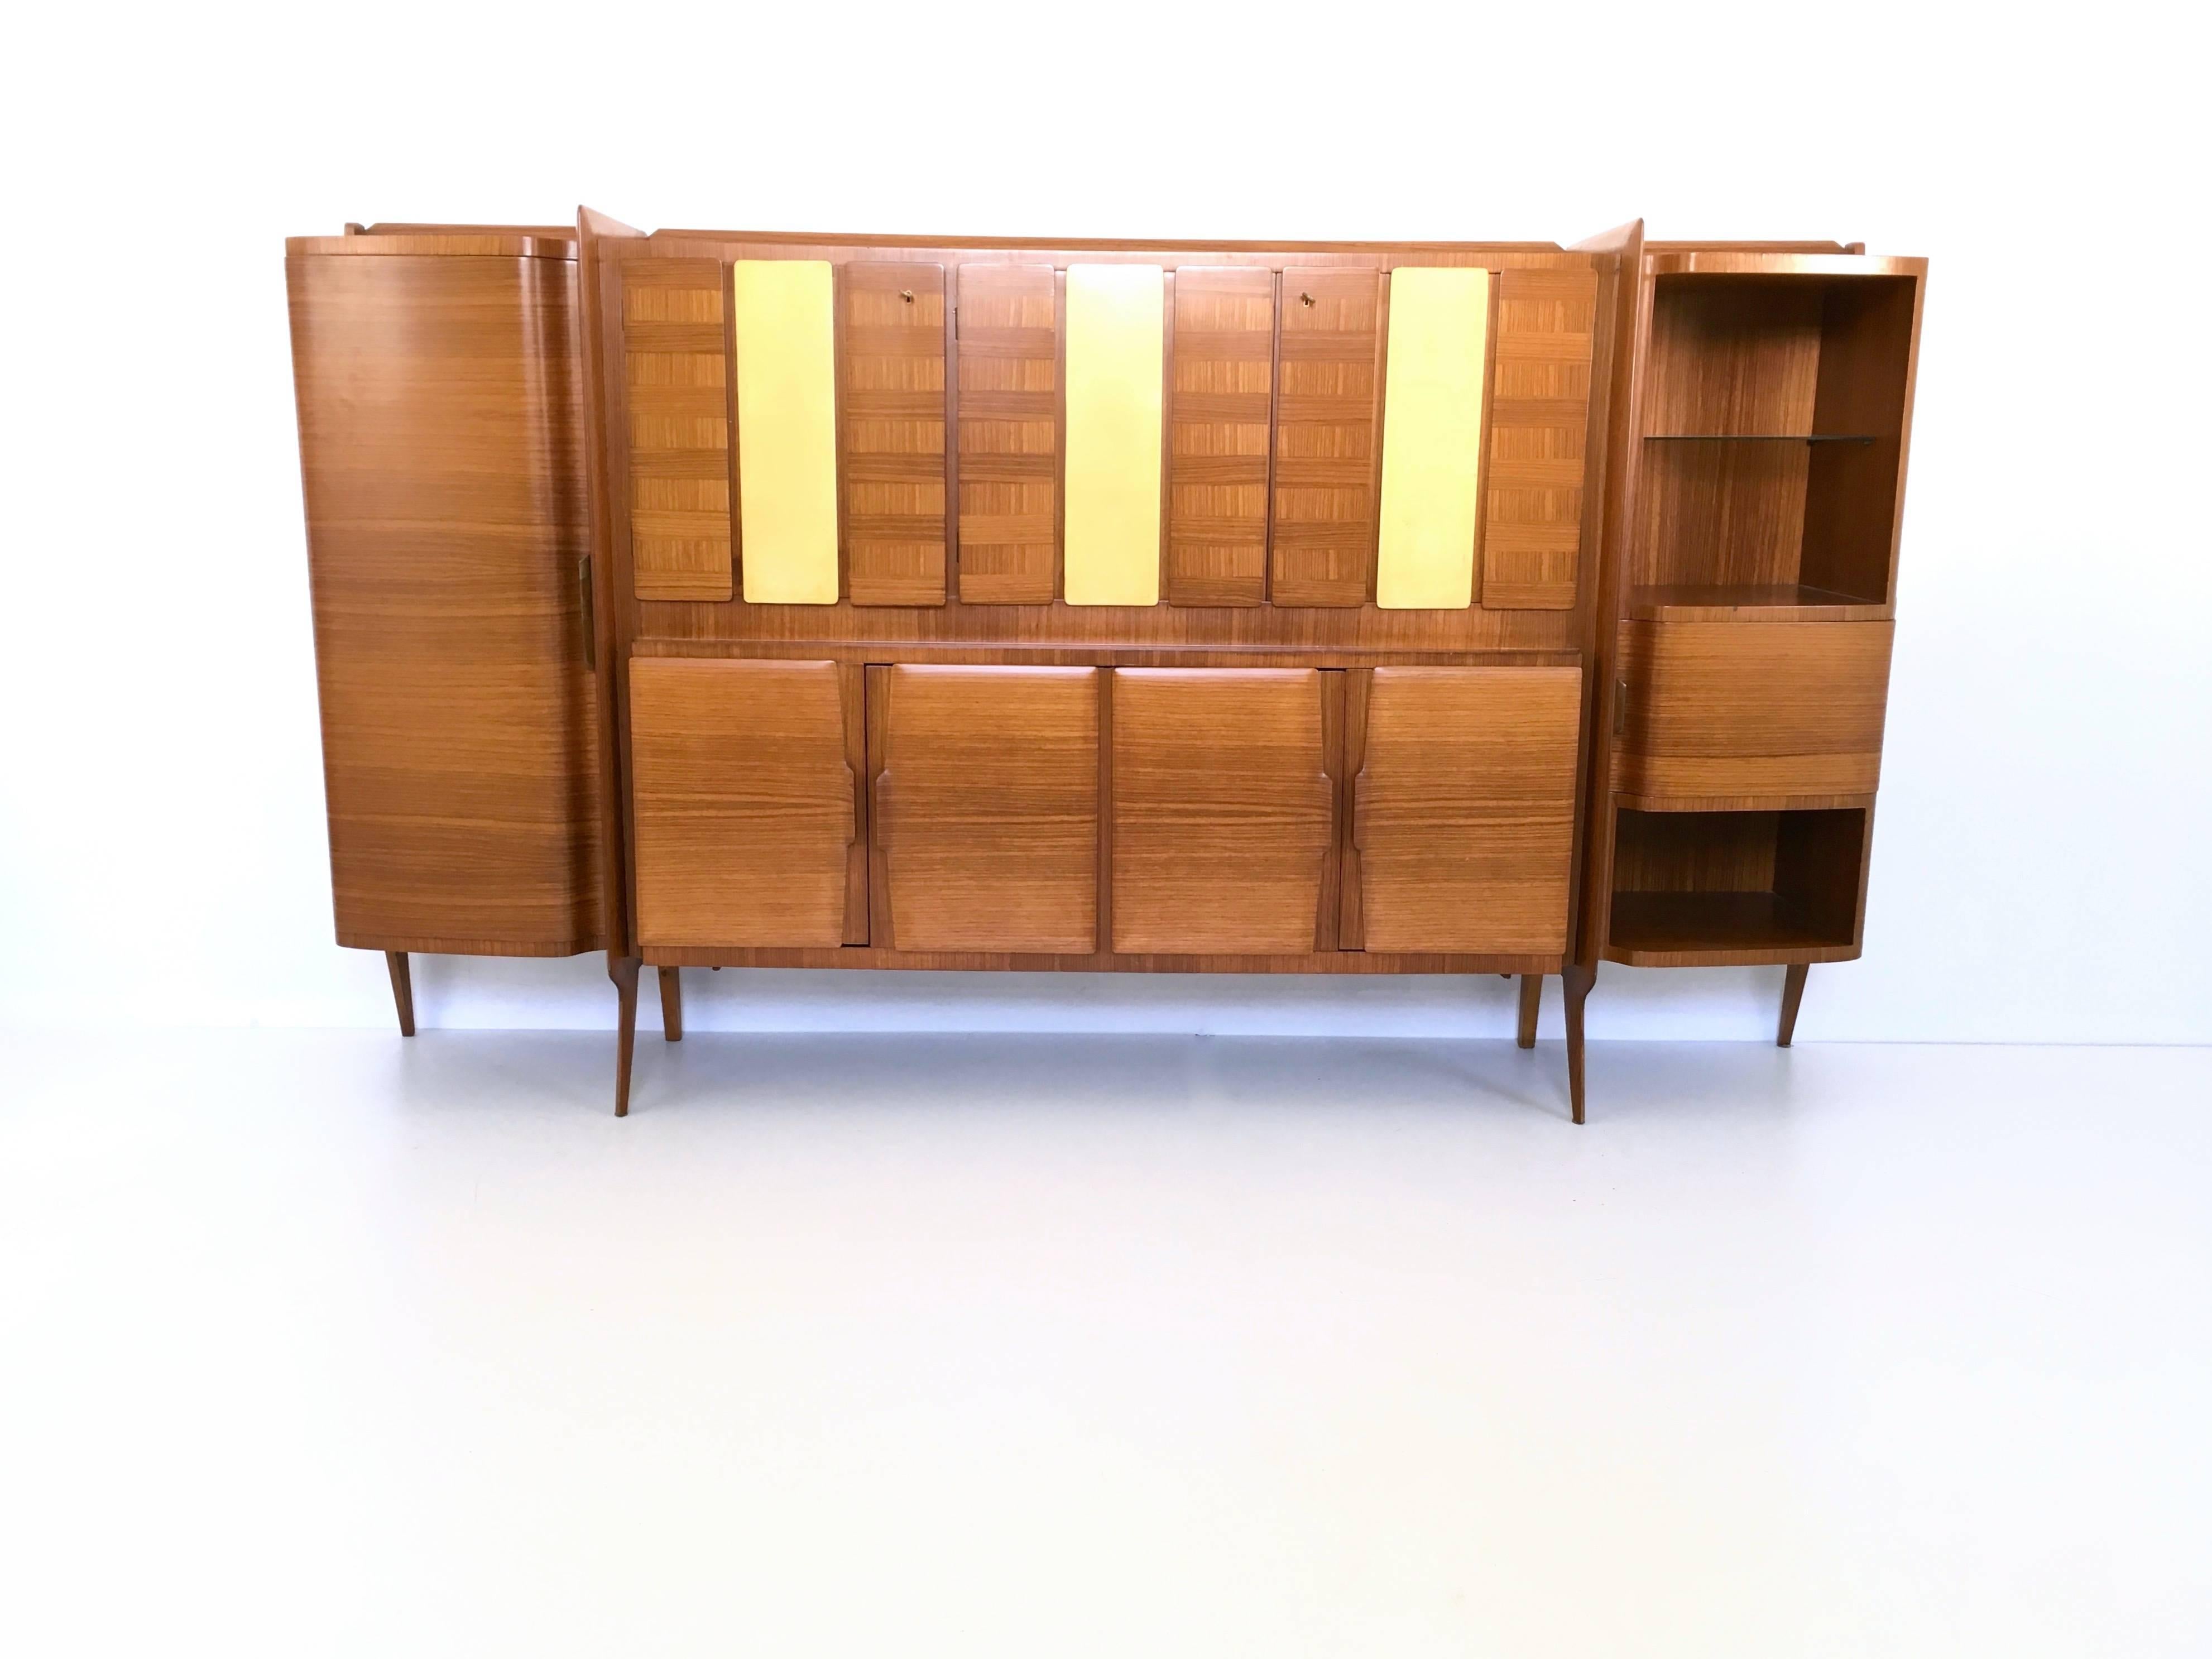 Made in Italy, 1950s.
It features parchment panels and it is made in a rare exotic wood.
Its bar part features mirrored glass interiors.
This is a vintage piece, therefore it might show slight traces of use, but it can be considered as in excellent